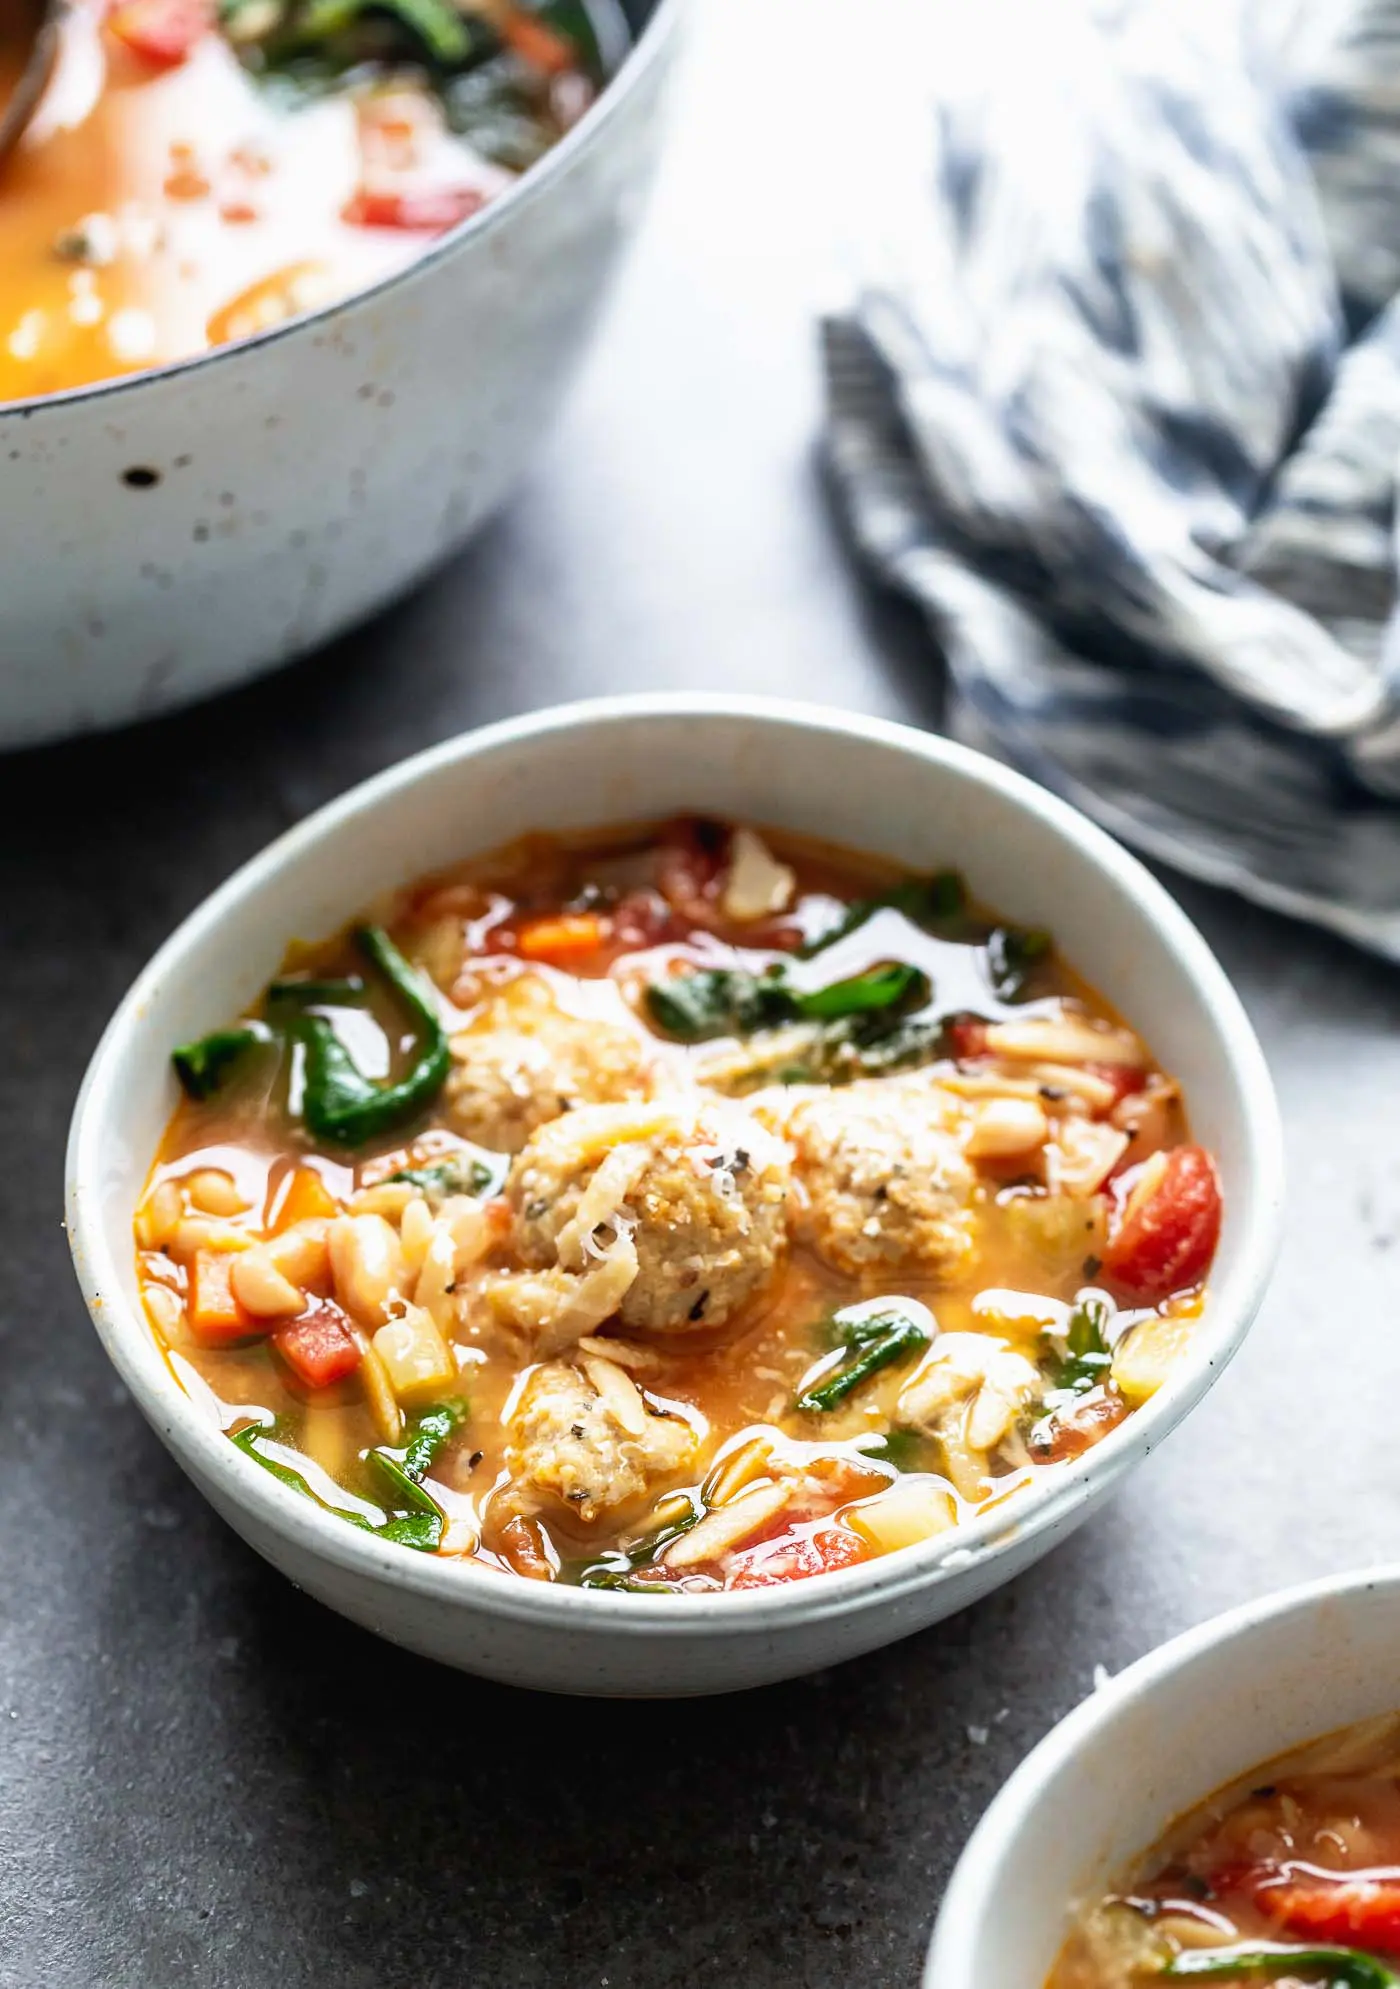 Minestrone with Chicken Meatballs is a hybrid of two comforting soups - minestrone and Italian wedding soup. With a rich, parmesan-infused broth, tons of veggies, whole-wheat orzo, and the most tender, flavorful chicken meatballs, this is a healthy winter soup worth making over and over again.